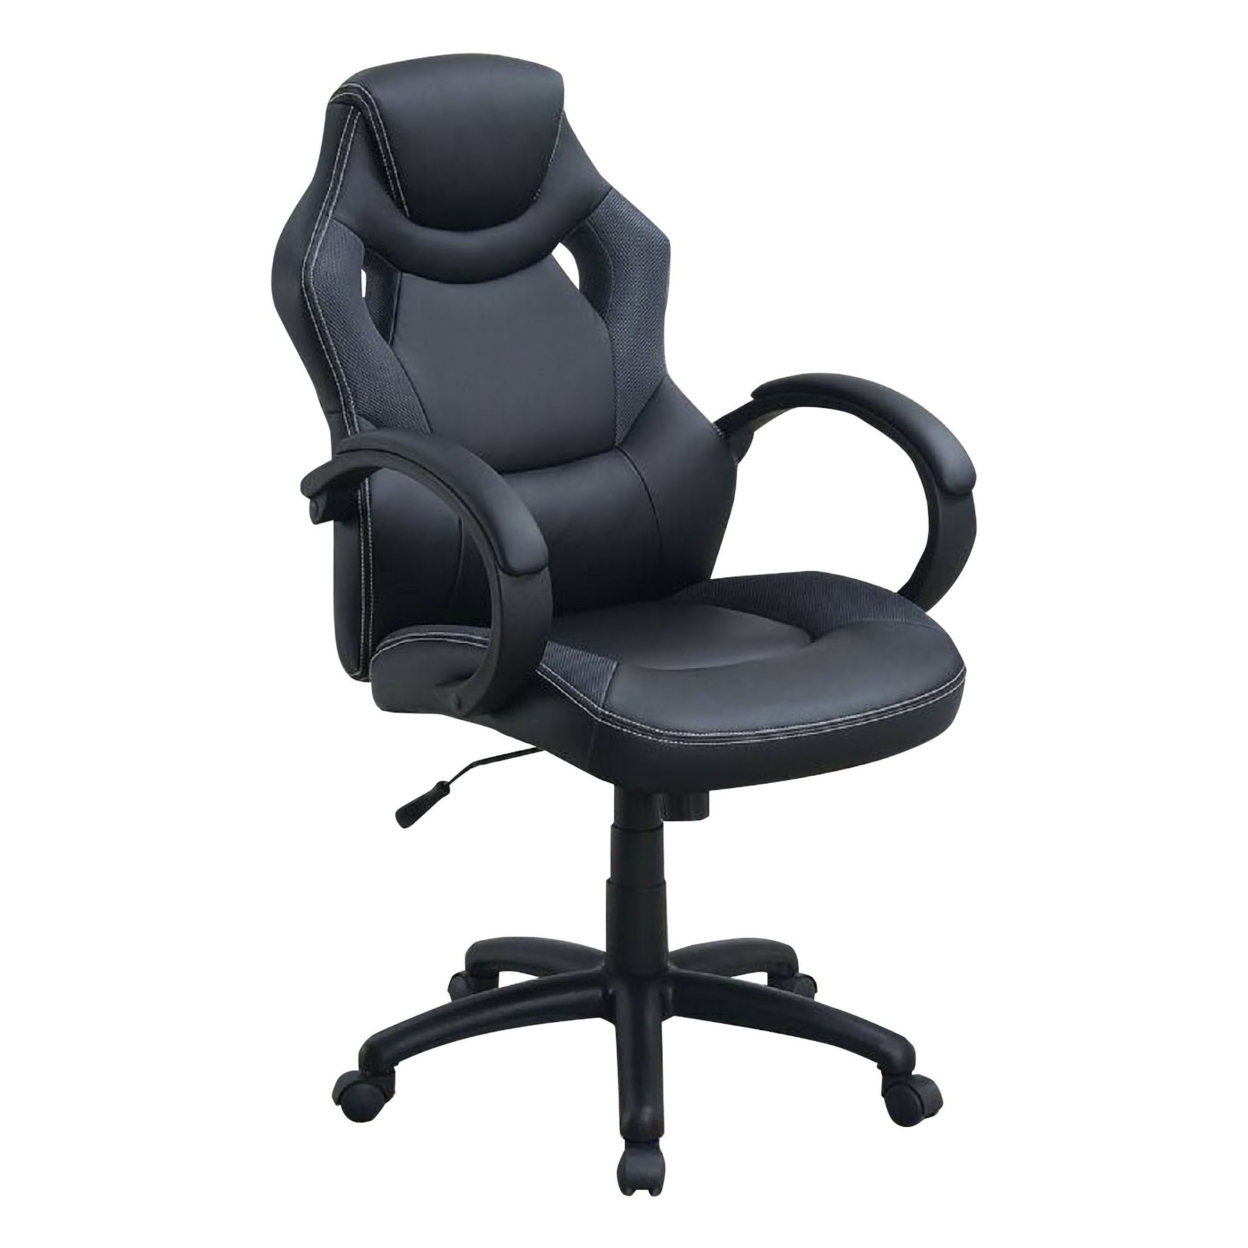 Office Chair With Curved Cut Out Padded Back, Black- Saltoro Sherpi